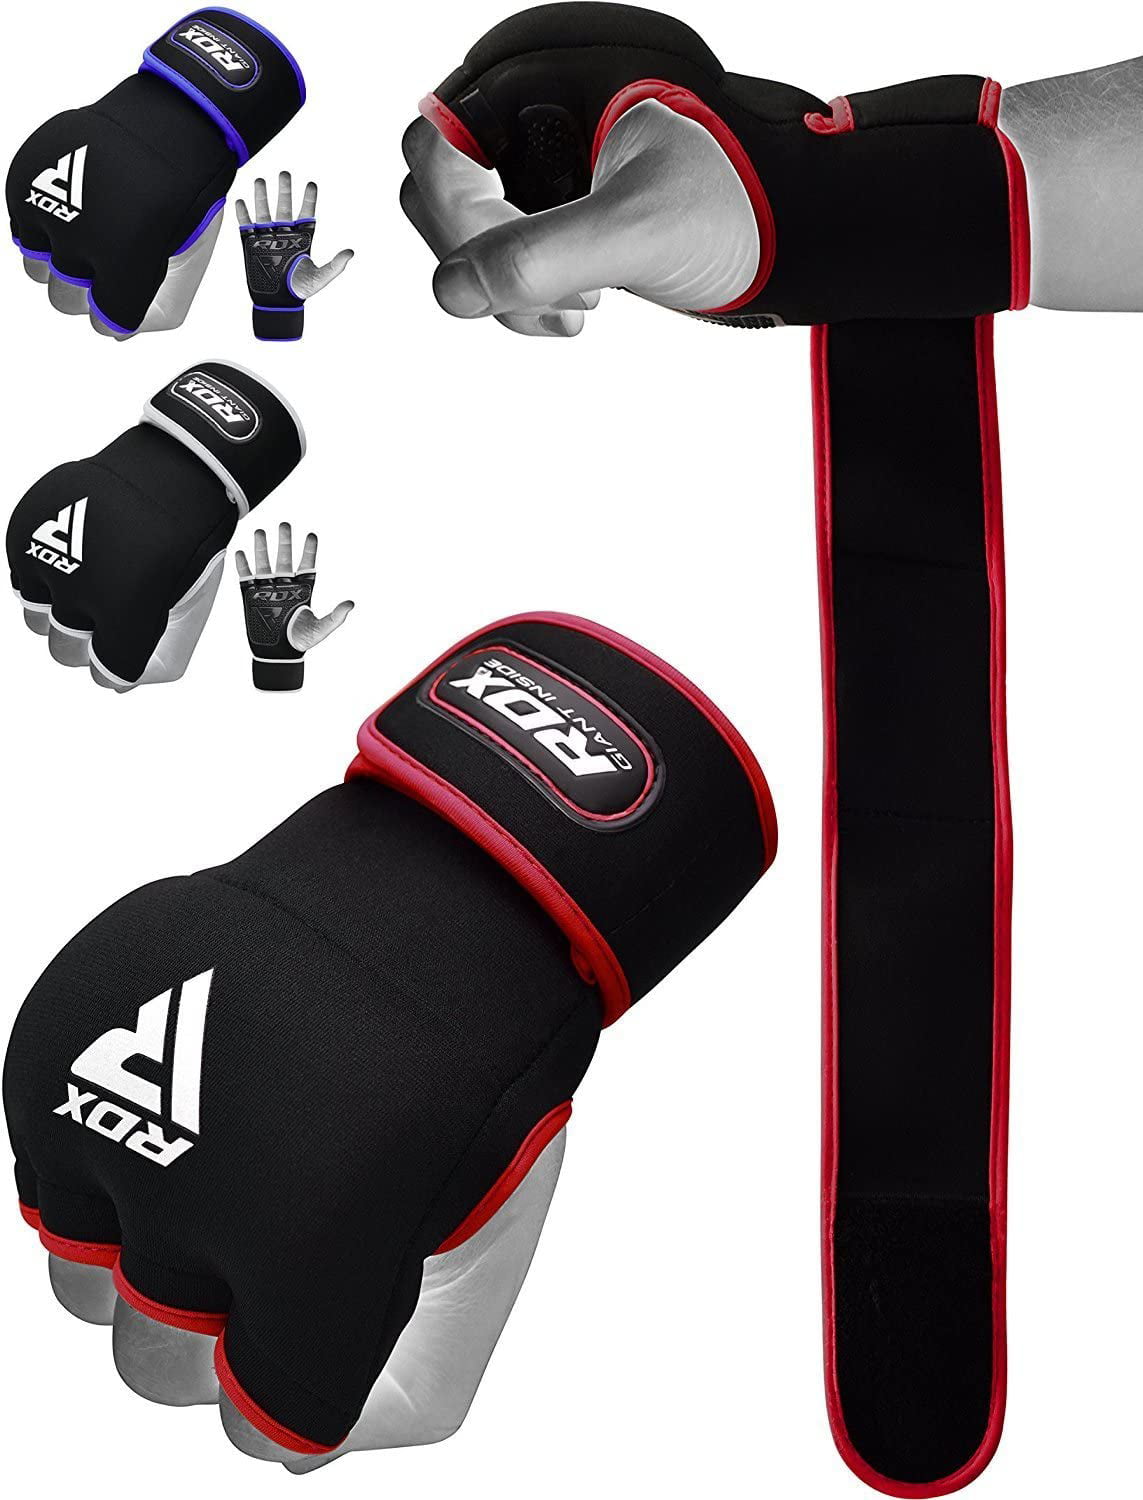 Great for MMA Kickboxing RDX Boxing Hand Wraps Inner Gloves for Punching Muay Thai Martial Arts Training & Combat Sports Half Finger Elasticated Bandages under Mitts Fist Protection